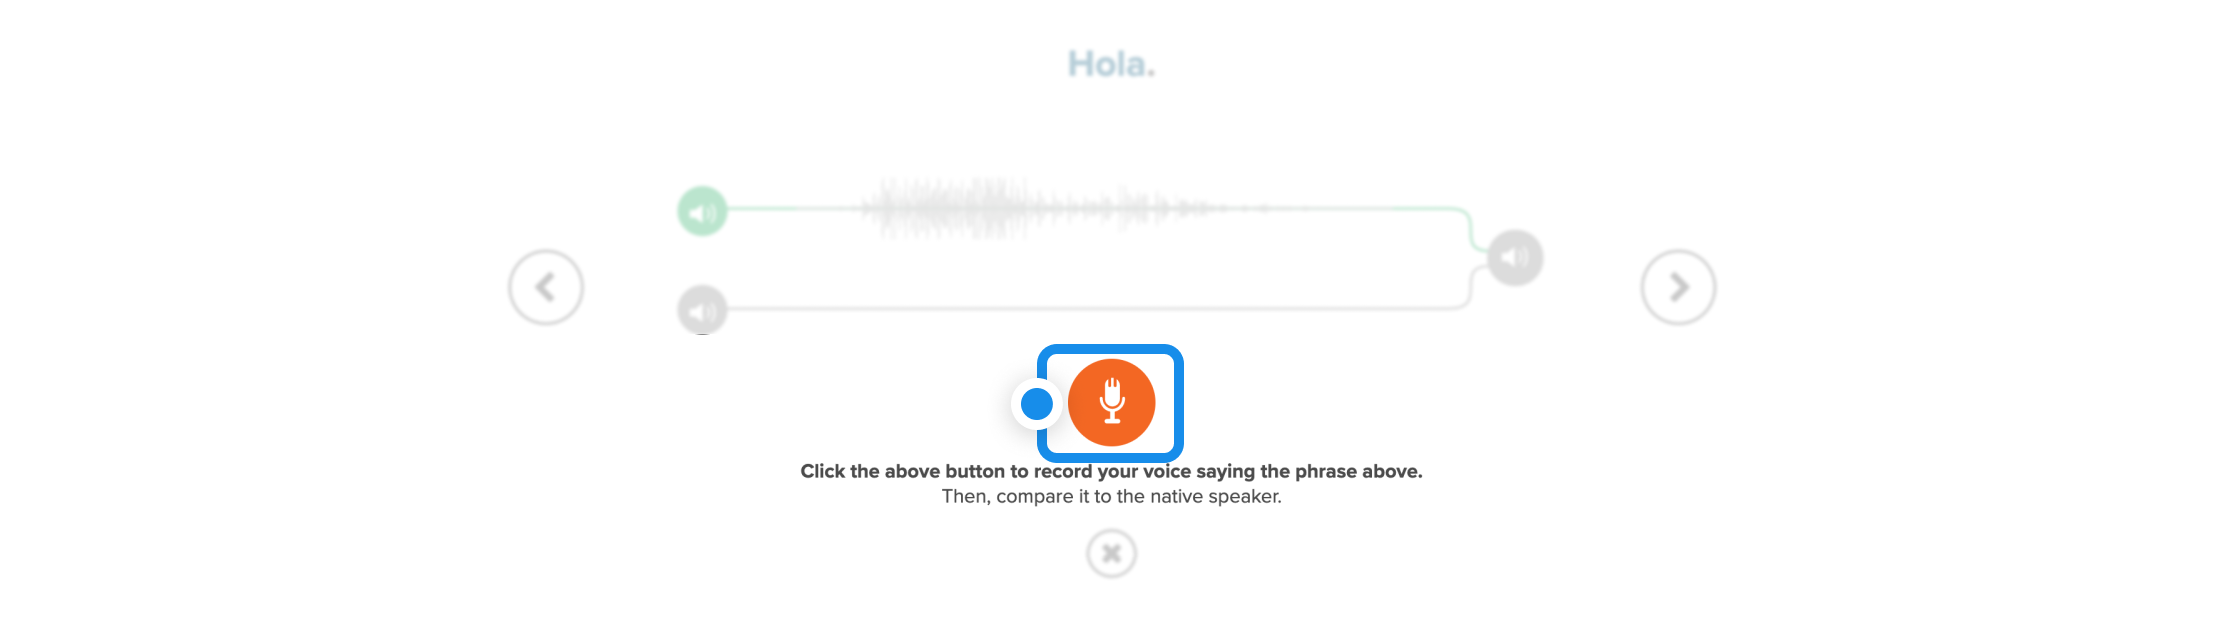 A box highlights the large Voice Comparison button in the center